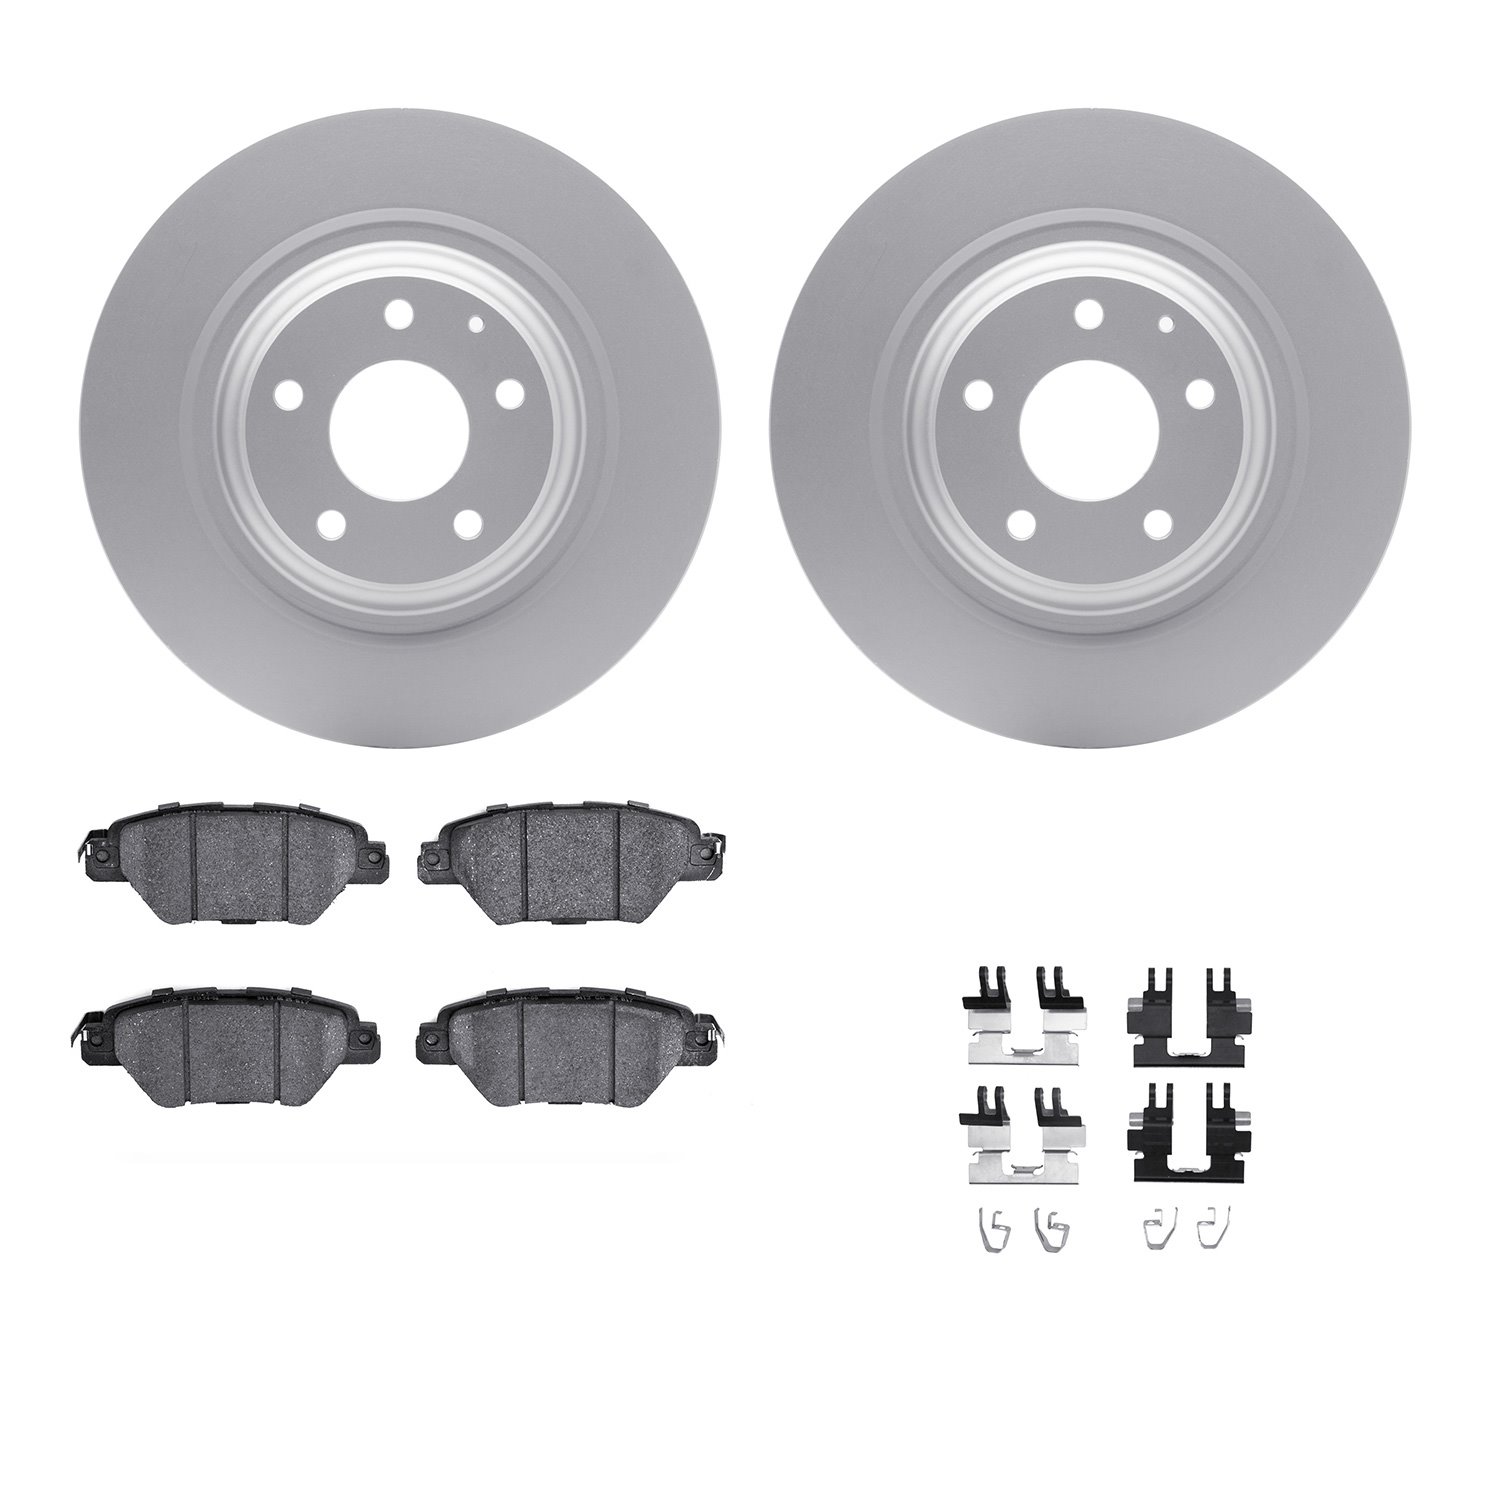 4312-80046 Geospec Brake Rotors with 3000-Series Ceramic Brake Pads & Hardware, Fits Select Ford/Lincoln/Mercury/Mazda, Position